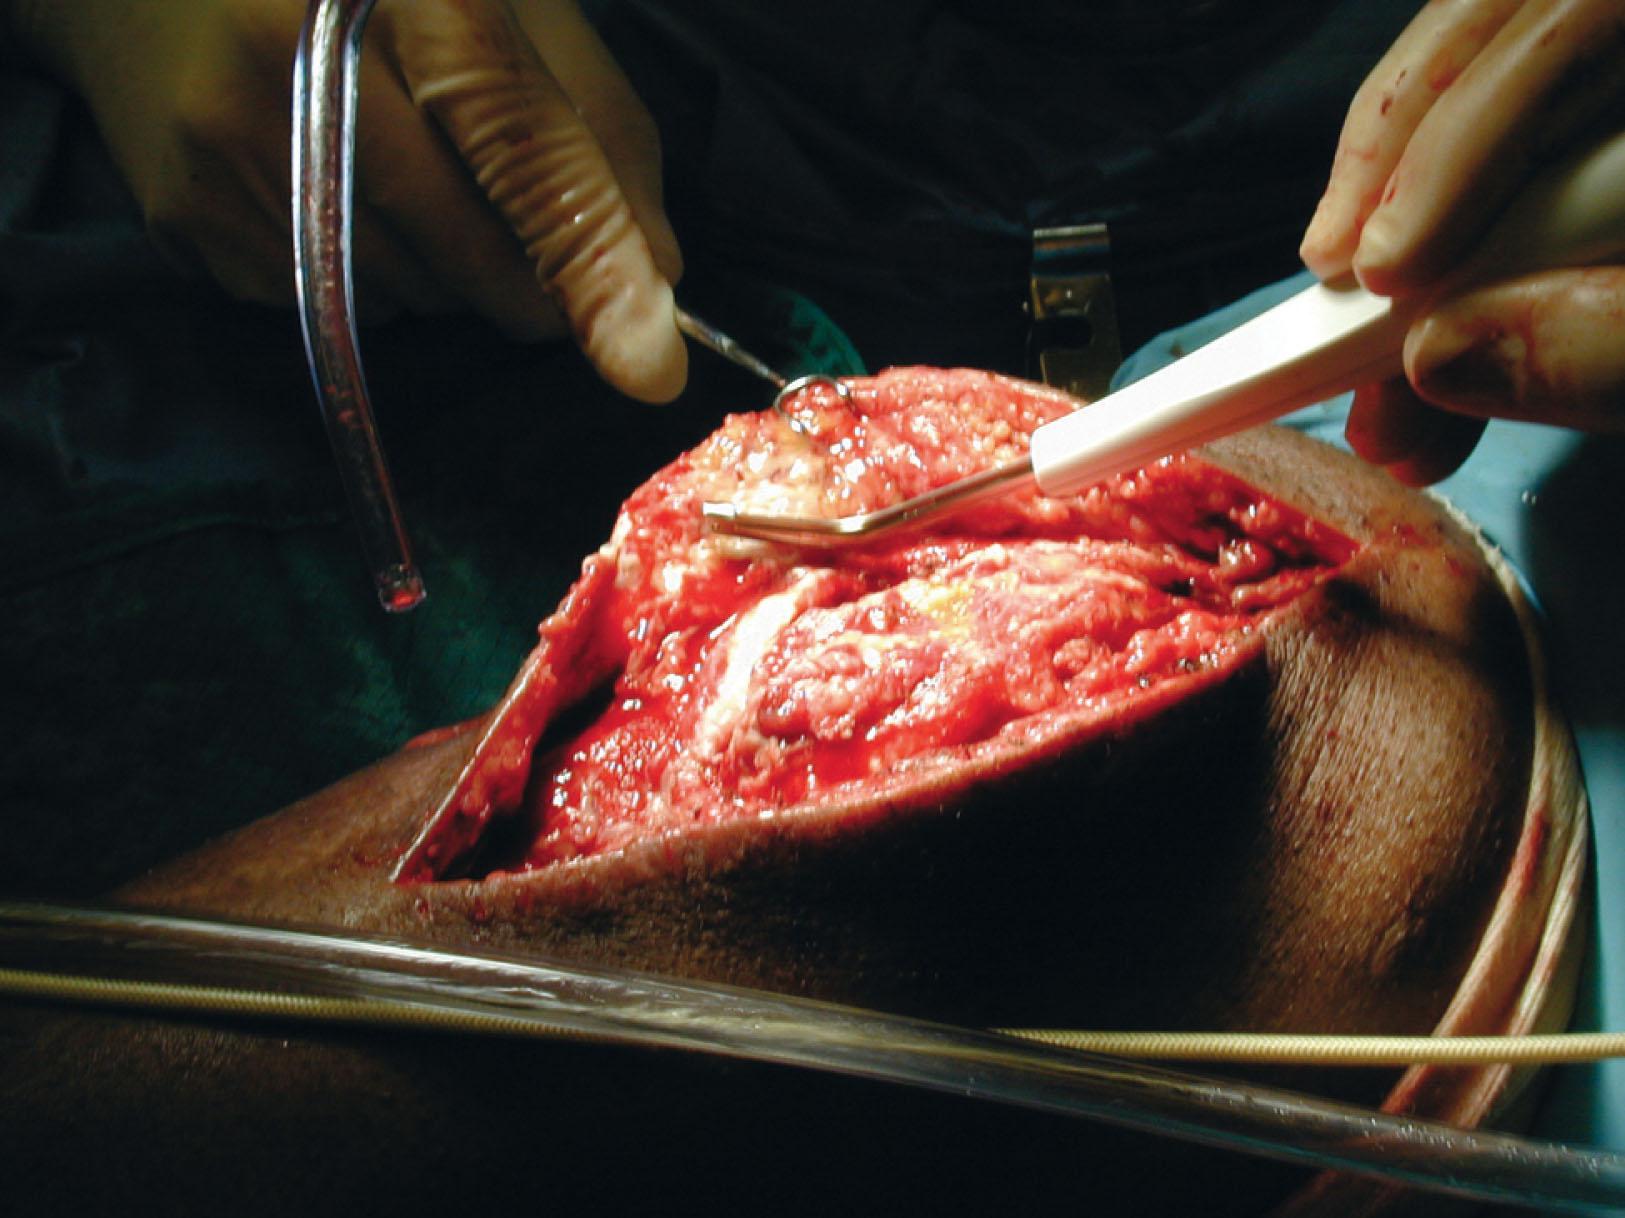 Fig. 42-10, The Versajet Hydrosurgery System in use debriding a wound.